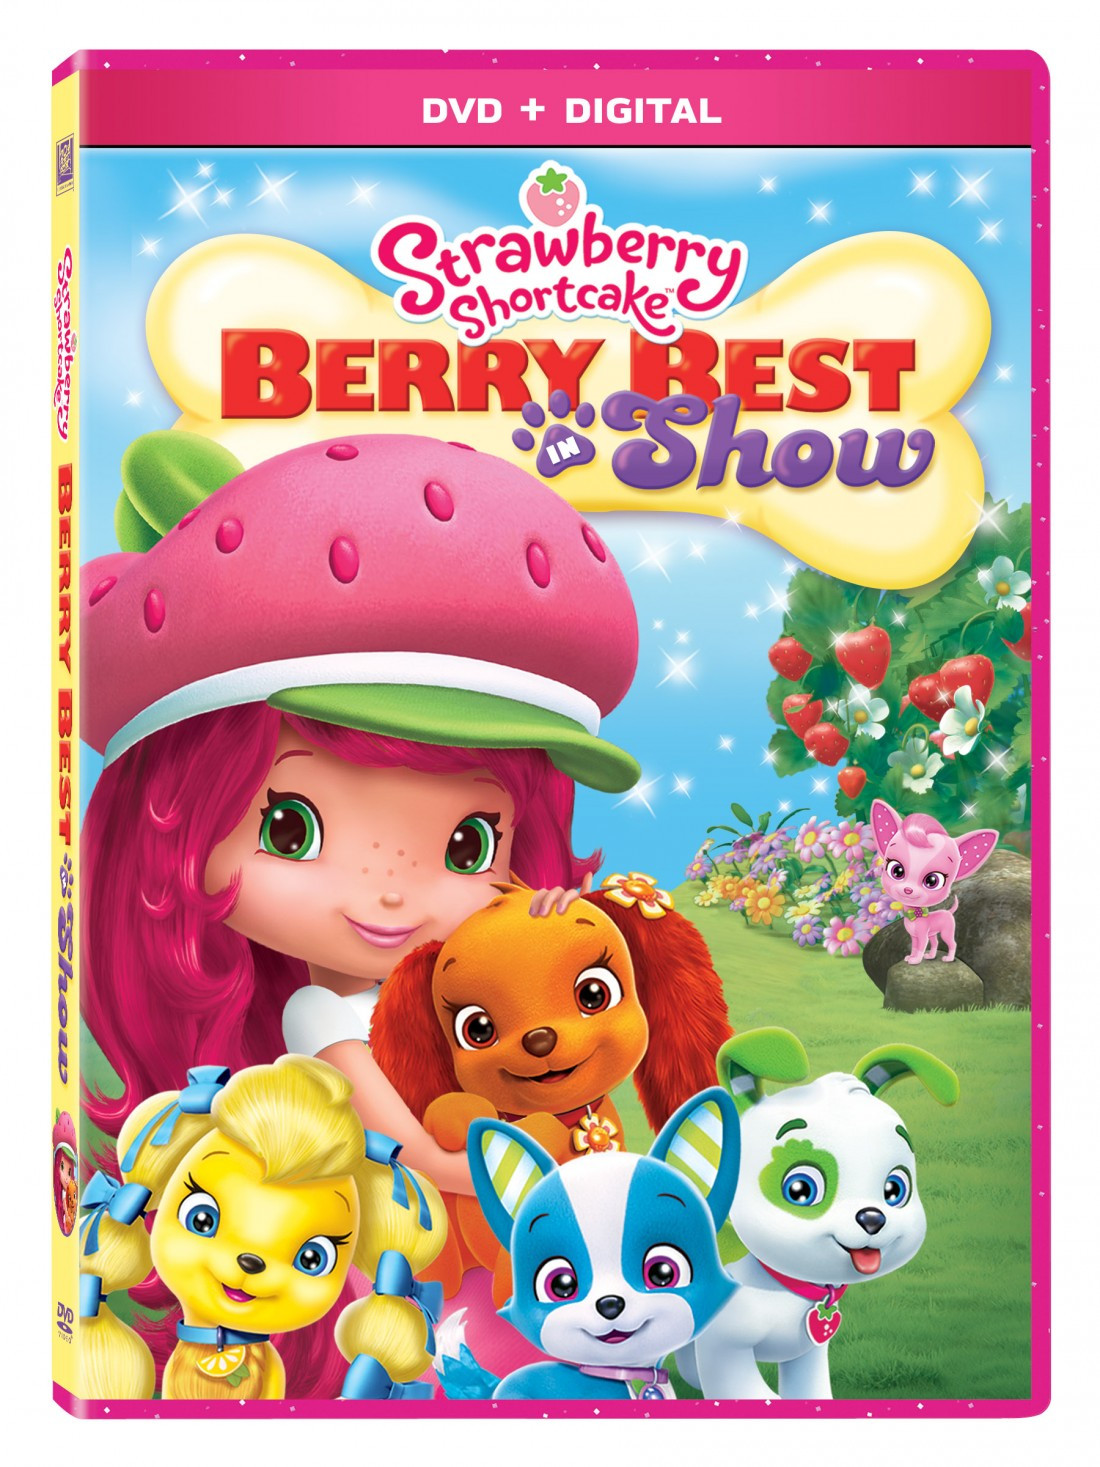 Strawberry Shortcake Dvds
 Strawberry Shortcake Berry Best in Show DVD Review and